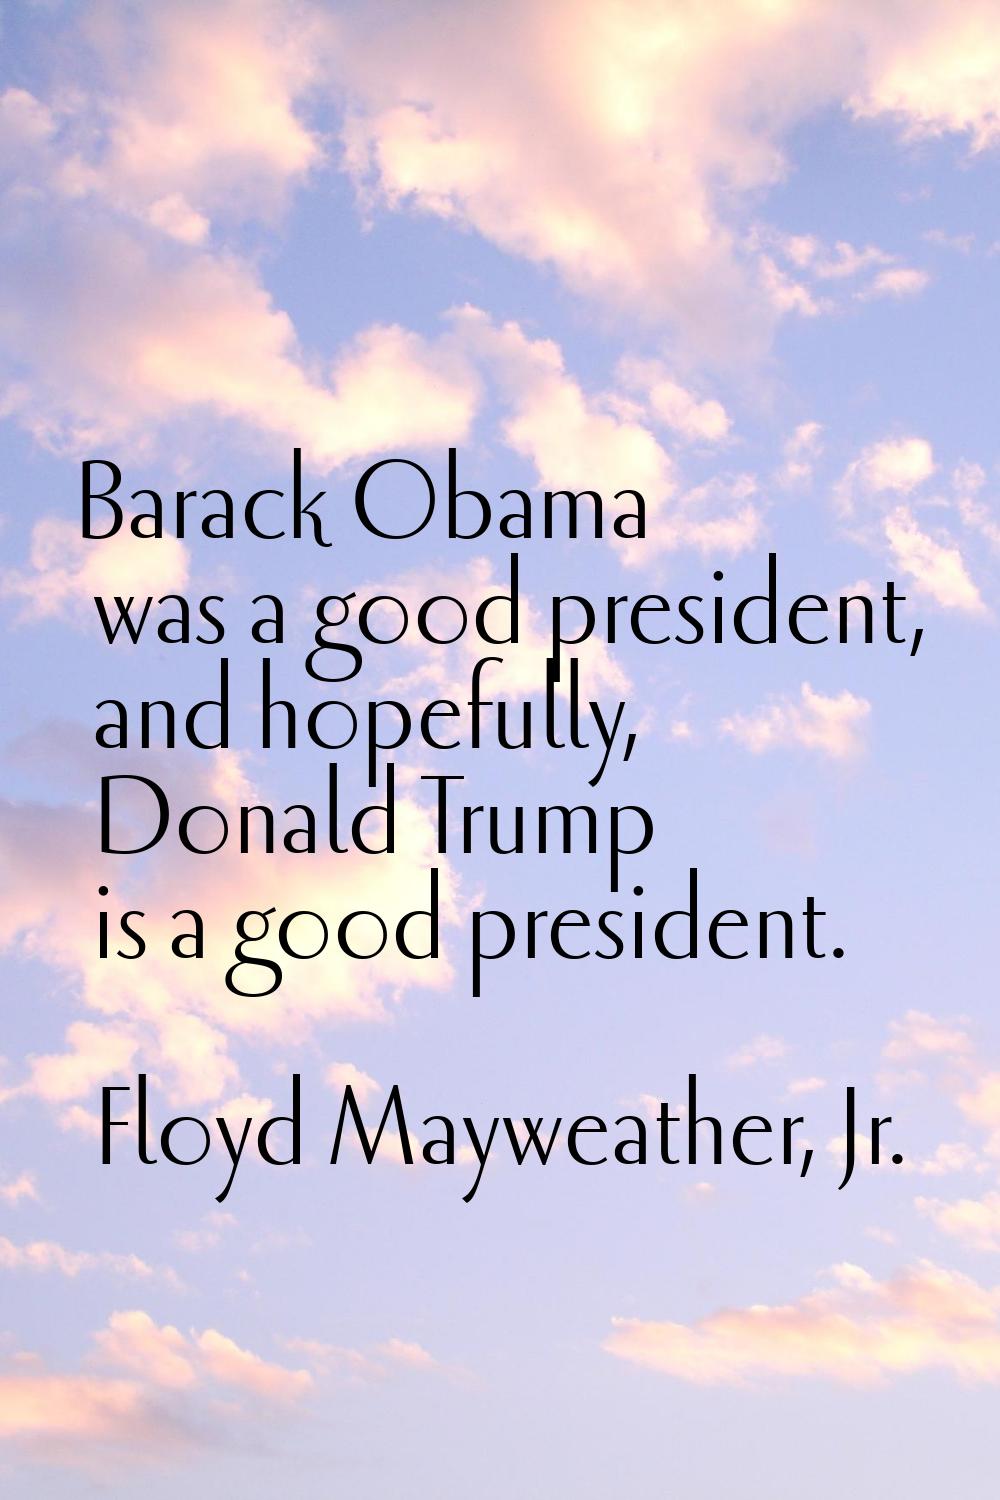 Barack Obama was a good president, and hopefully, Donald Trump is a good president.